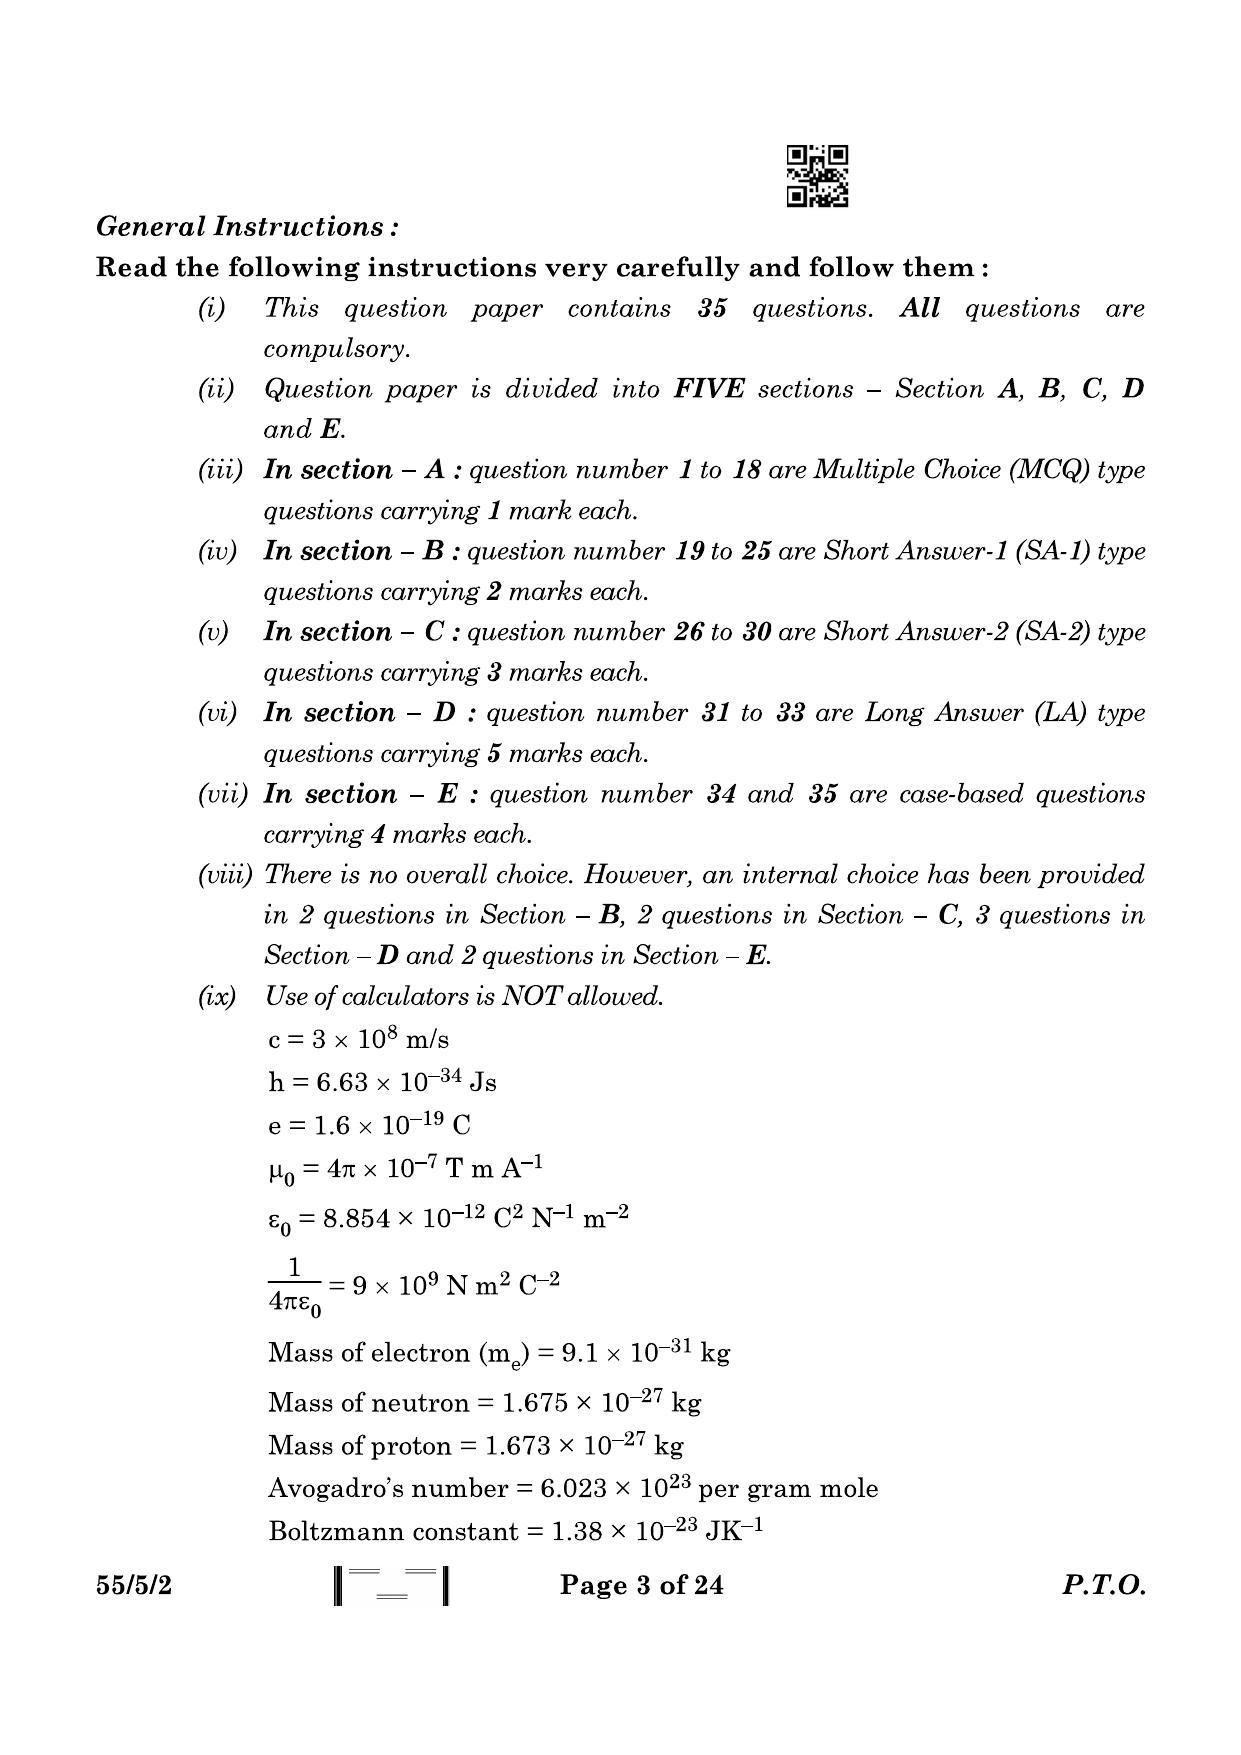 CBSE Class 12 55-5-2 Physics 2023 Question Paper - Page 3